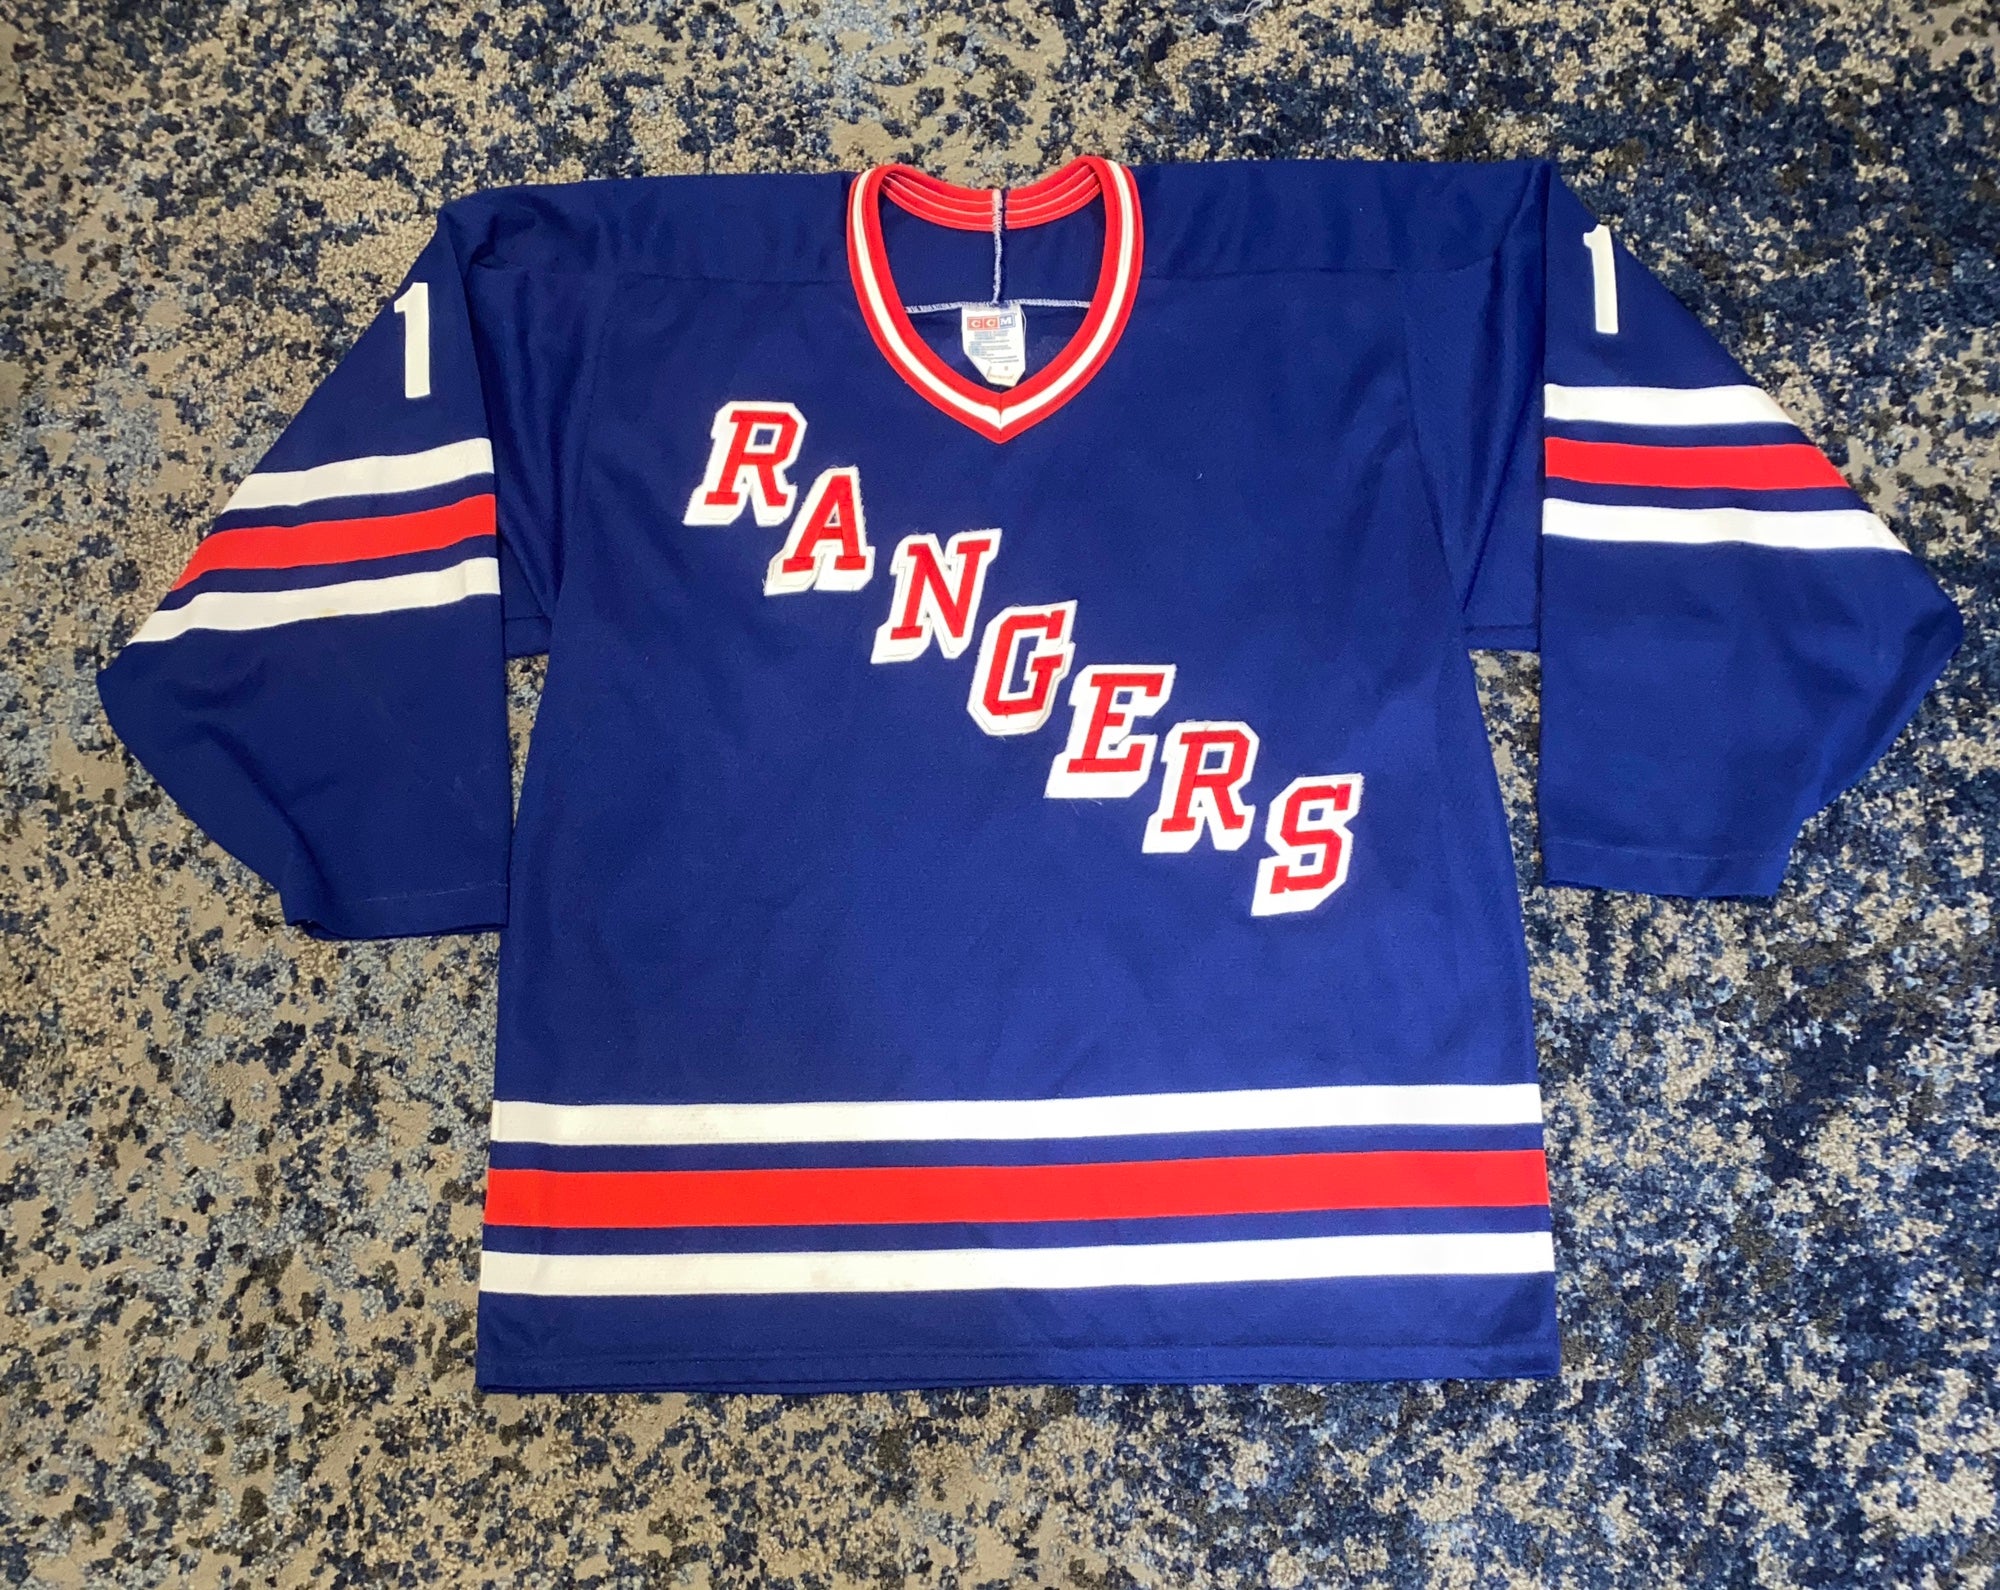 One of the best NY Rangers jerseys on the planet 🌏🗽 Early 00's Mark  Messier New York Rangers Lady liberty CCM NHL jersey Size Medium…